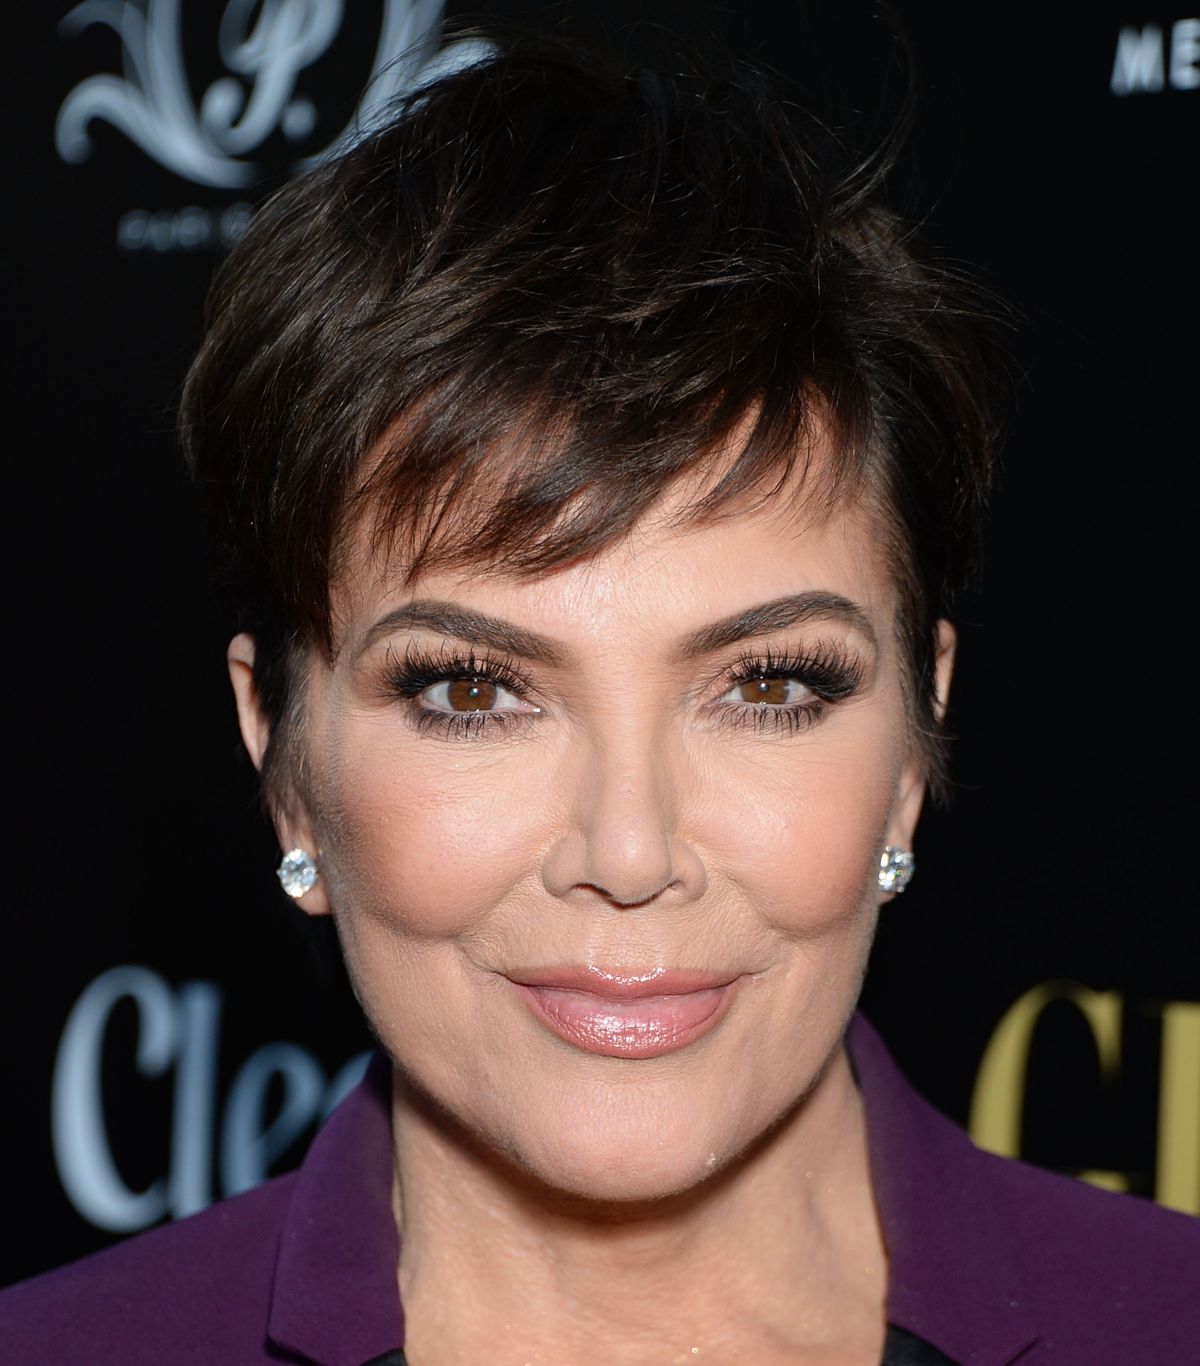 kris-jenner-at-the-glam-app-launch-in-los-angeles-06-19-2019-1.jpg